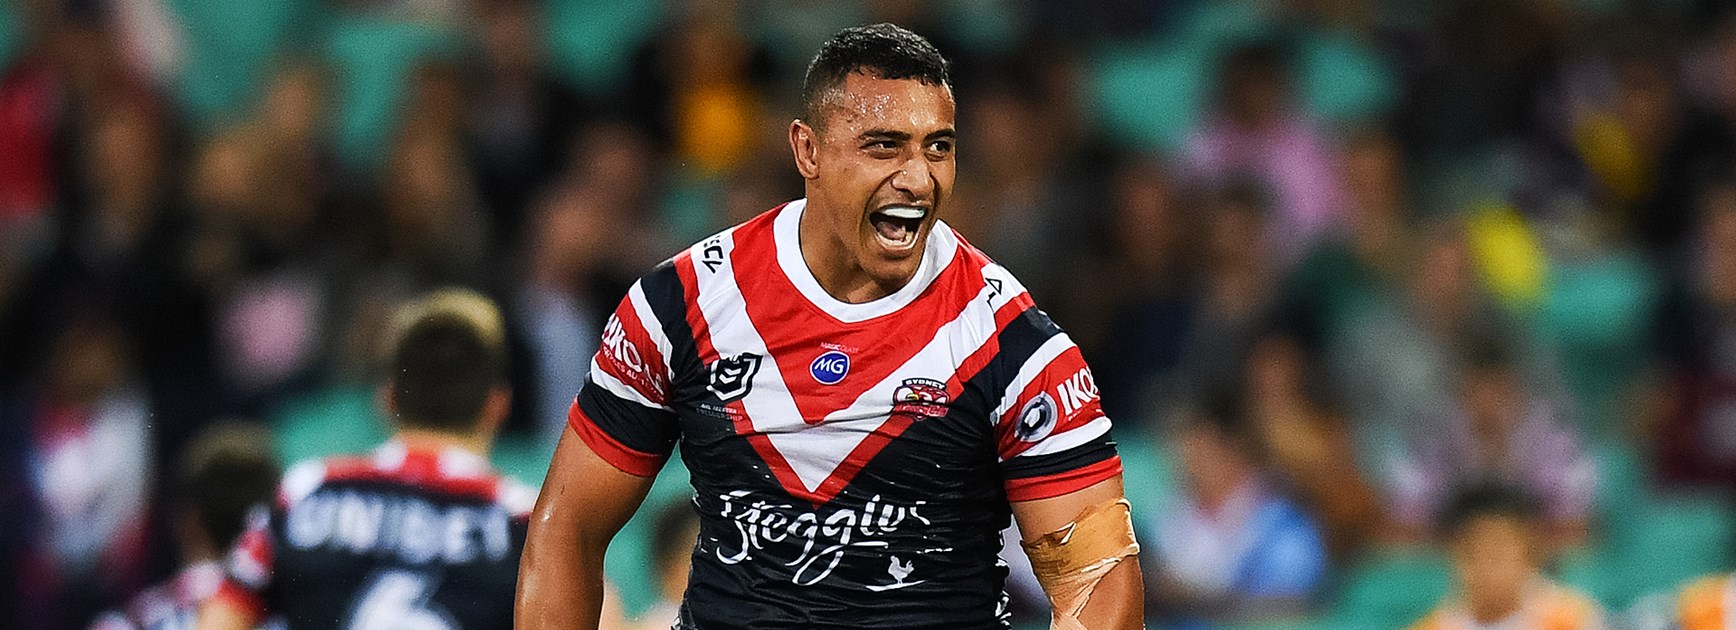 Taukeiaho ready to step up again without JWH